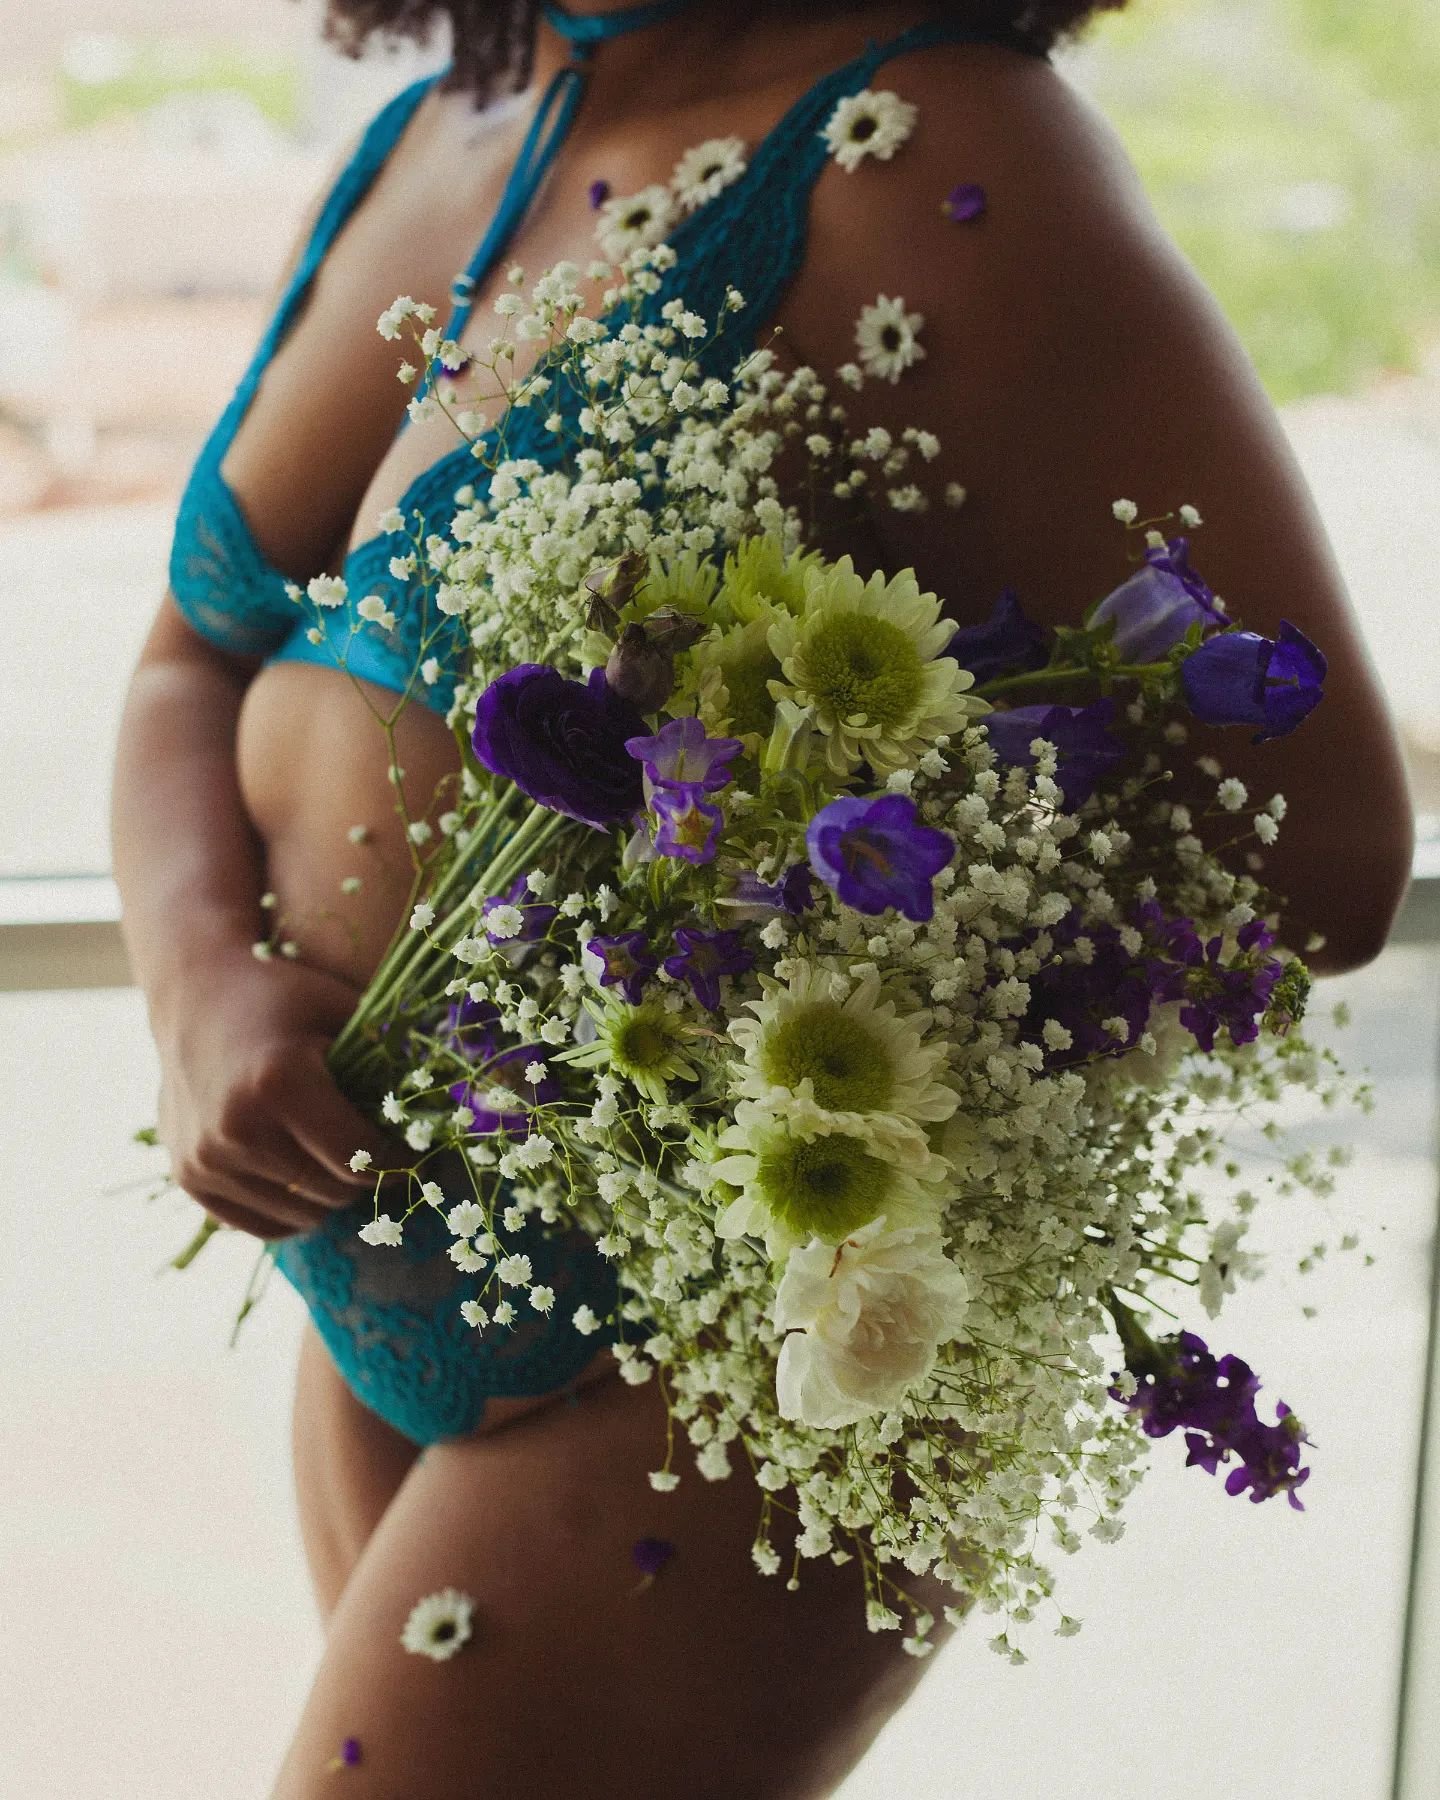 Throwback to the last time I did a floral photoshoot! I think the flowers glued to her body added to the whimsy of it!!

In the bucket list photoshoots I posted yesterday I have some inspo that is like this but on steroids 🤣🤣 more flowers! More whi